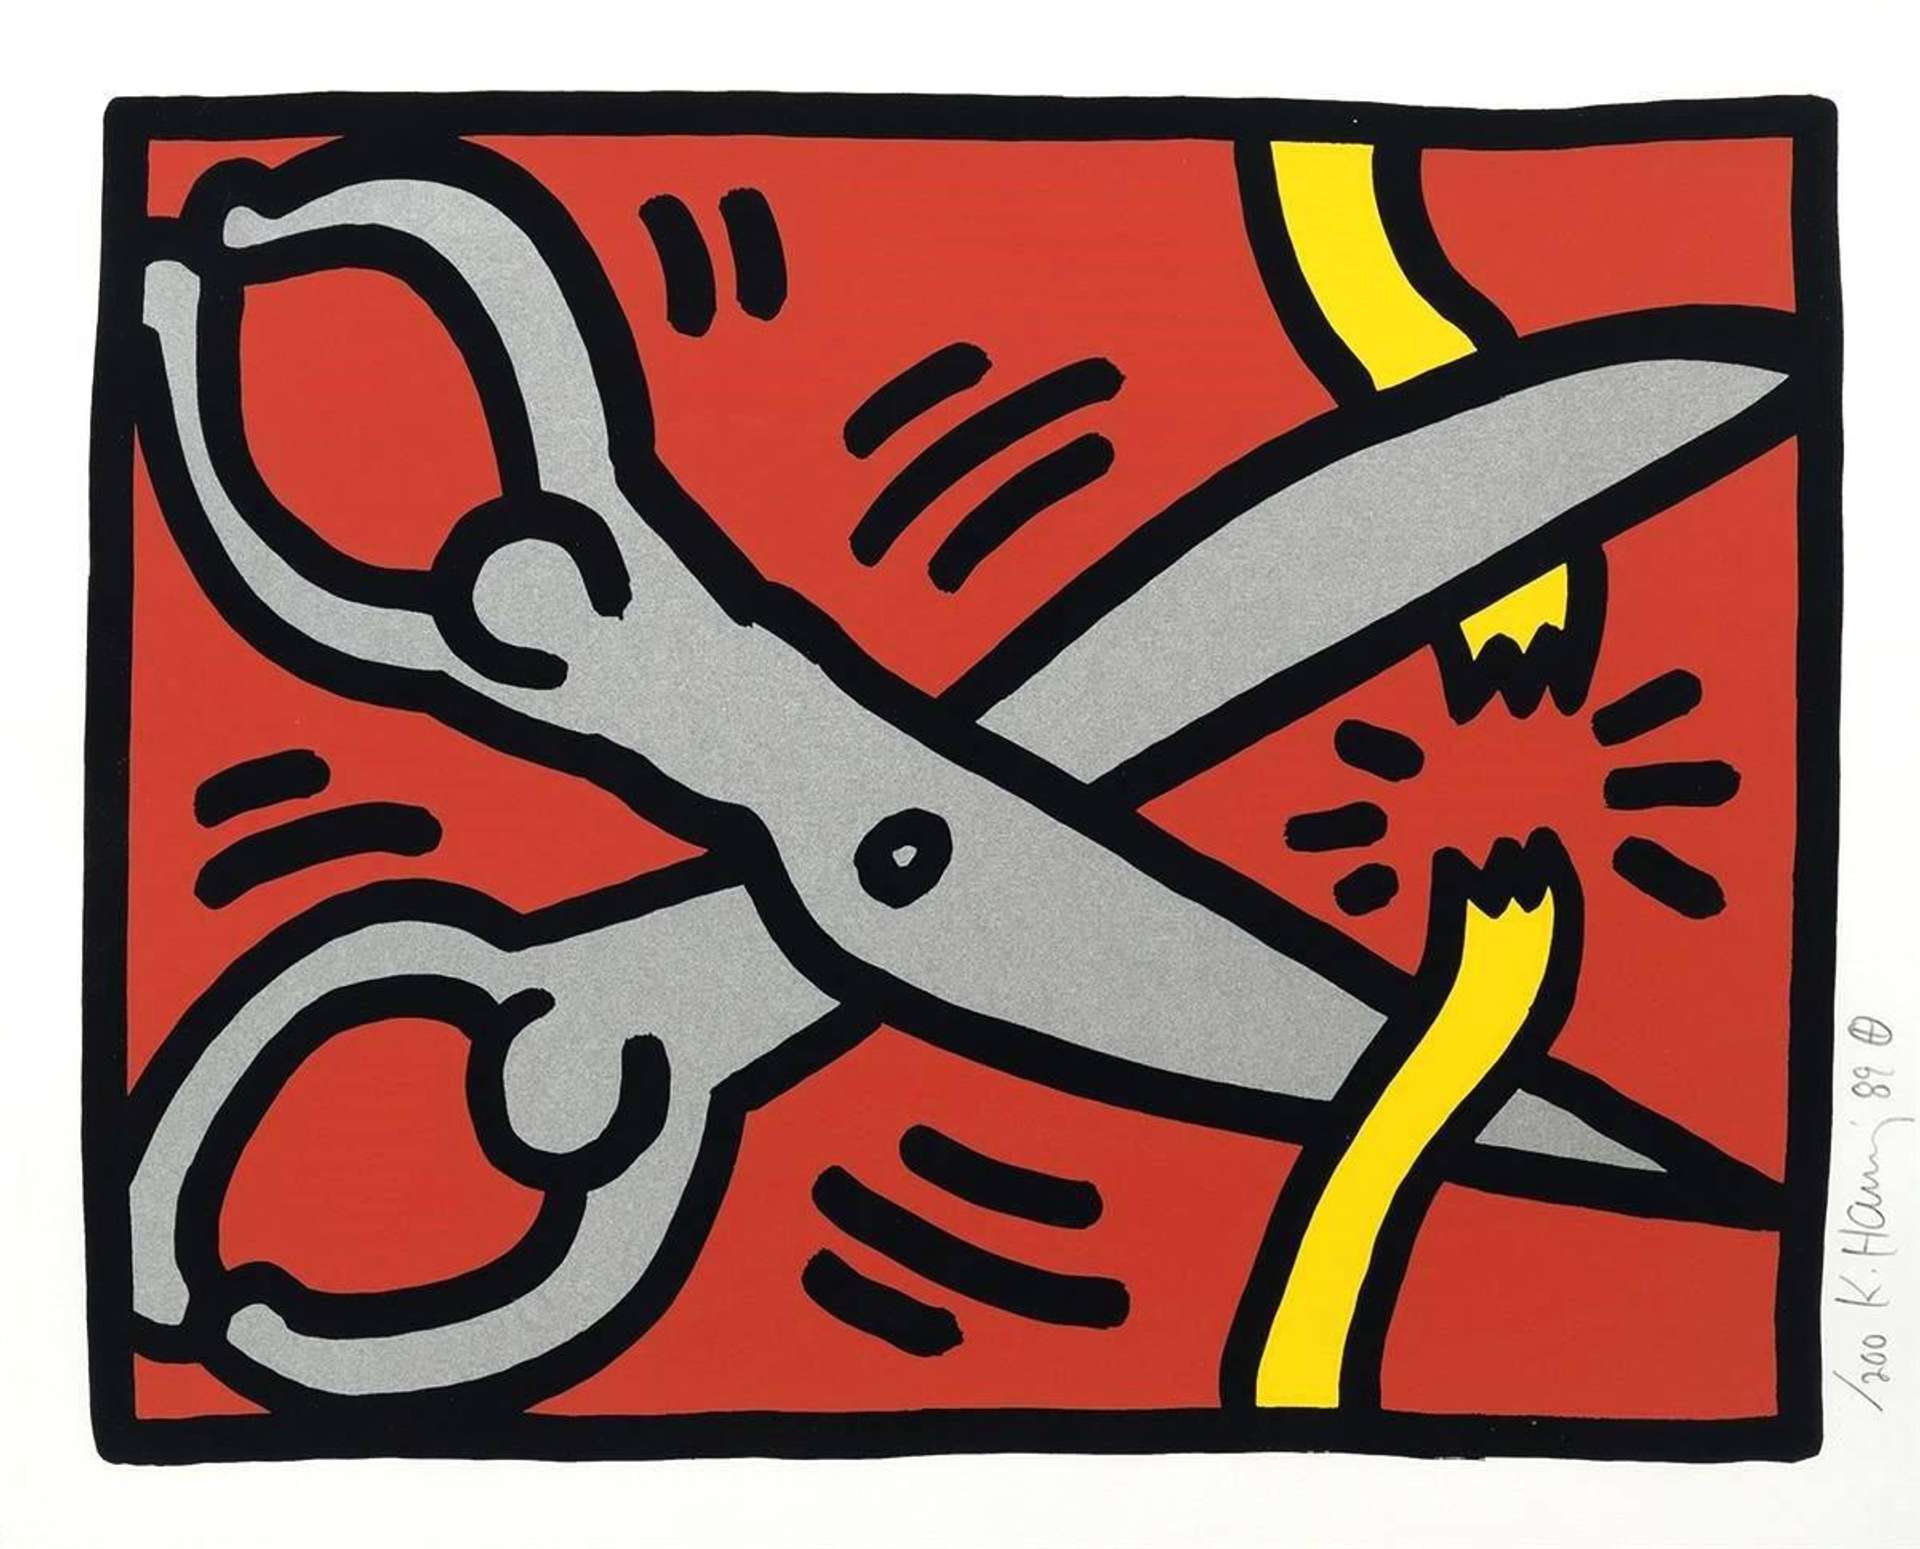 Keith Haring’s Pop Shop III, Plate III. A Pop Art screenprint of a pair of grey scissors, cutting a yellow string, with the top part of the scissors resembling two animated characters with their arms crossed over their heads. 